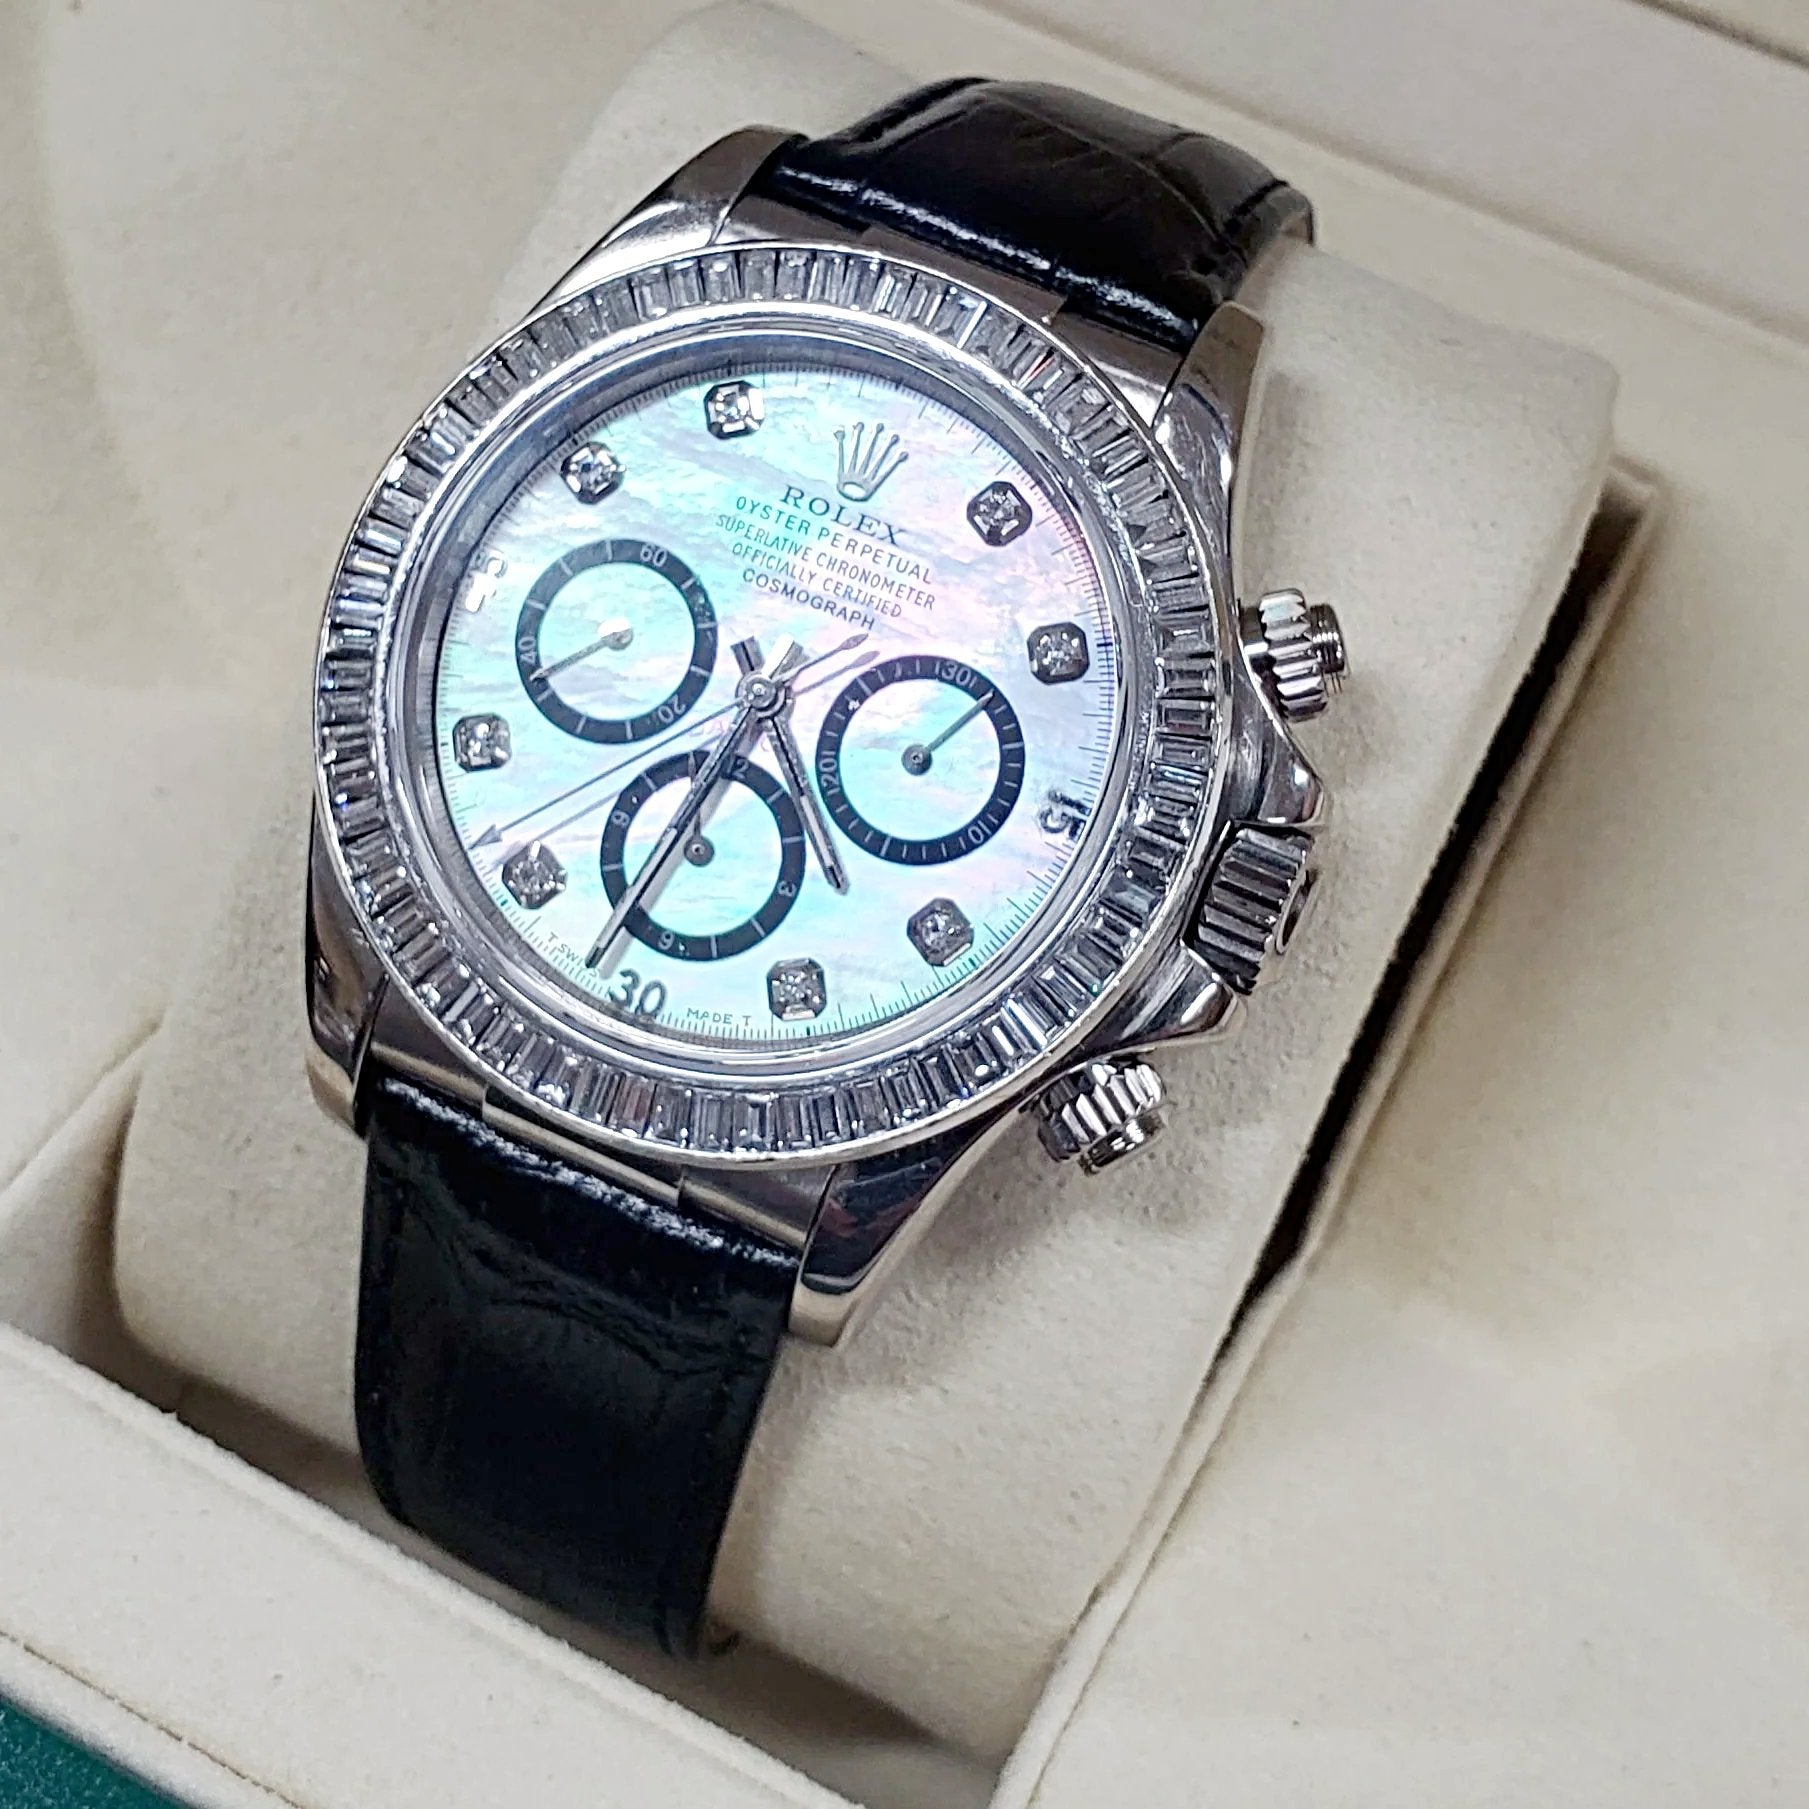 Men's Rolex Mother of Pearl Daytona Leather Strap Watch with Diamond Bezel and Diamond Dial. (Pre-Owned 116518)